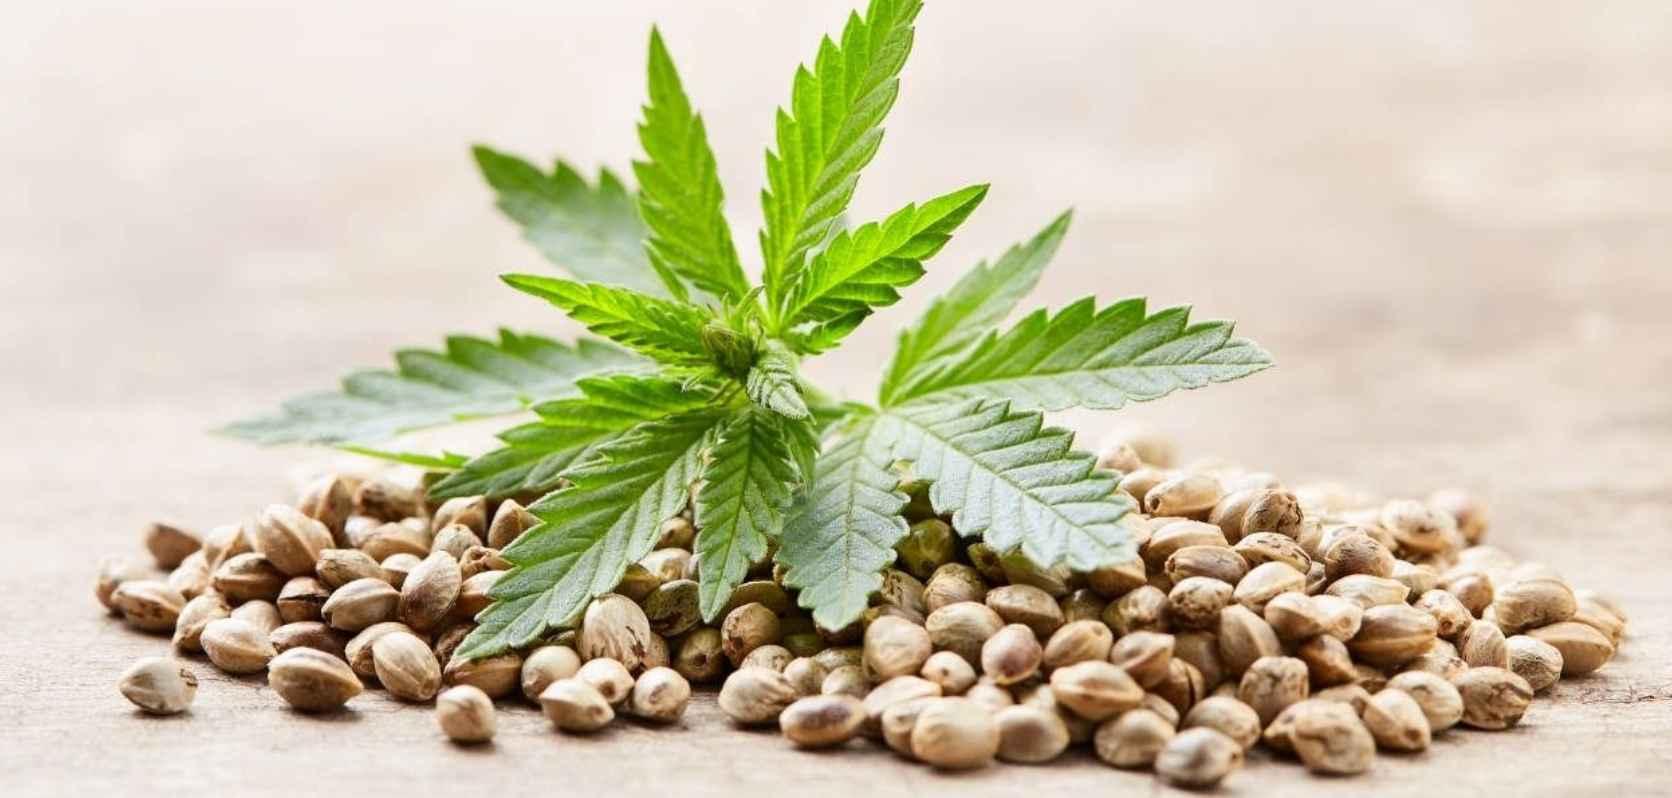 Yes, you can crush cannabis seeds and smoke them. But no, you shouldn't smoke cannabis seeds. Marijuana seeds contain very little THC—not nearly enough to get you high.